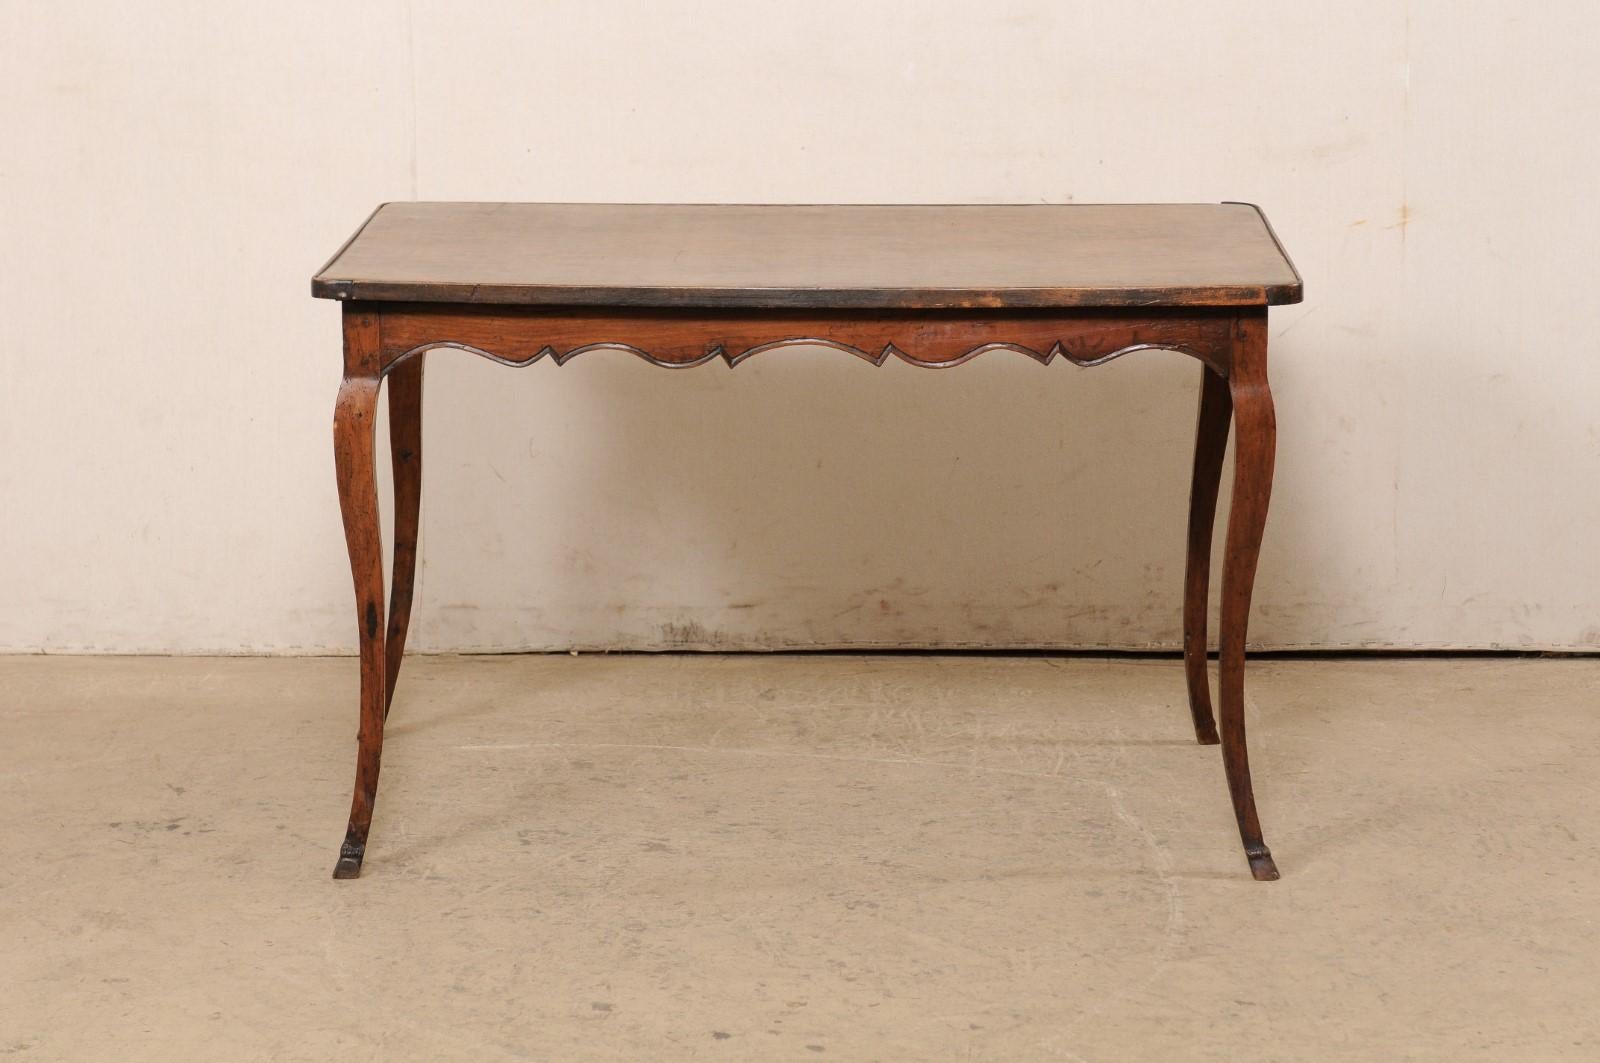 A French carved-wood desk with leather writing pad top from the 18th century. This antique table from France features a rectangular-shaped top with rounded corners and fitted with a warm/camel-colored leather writing pad, which slightly overhangs an